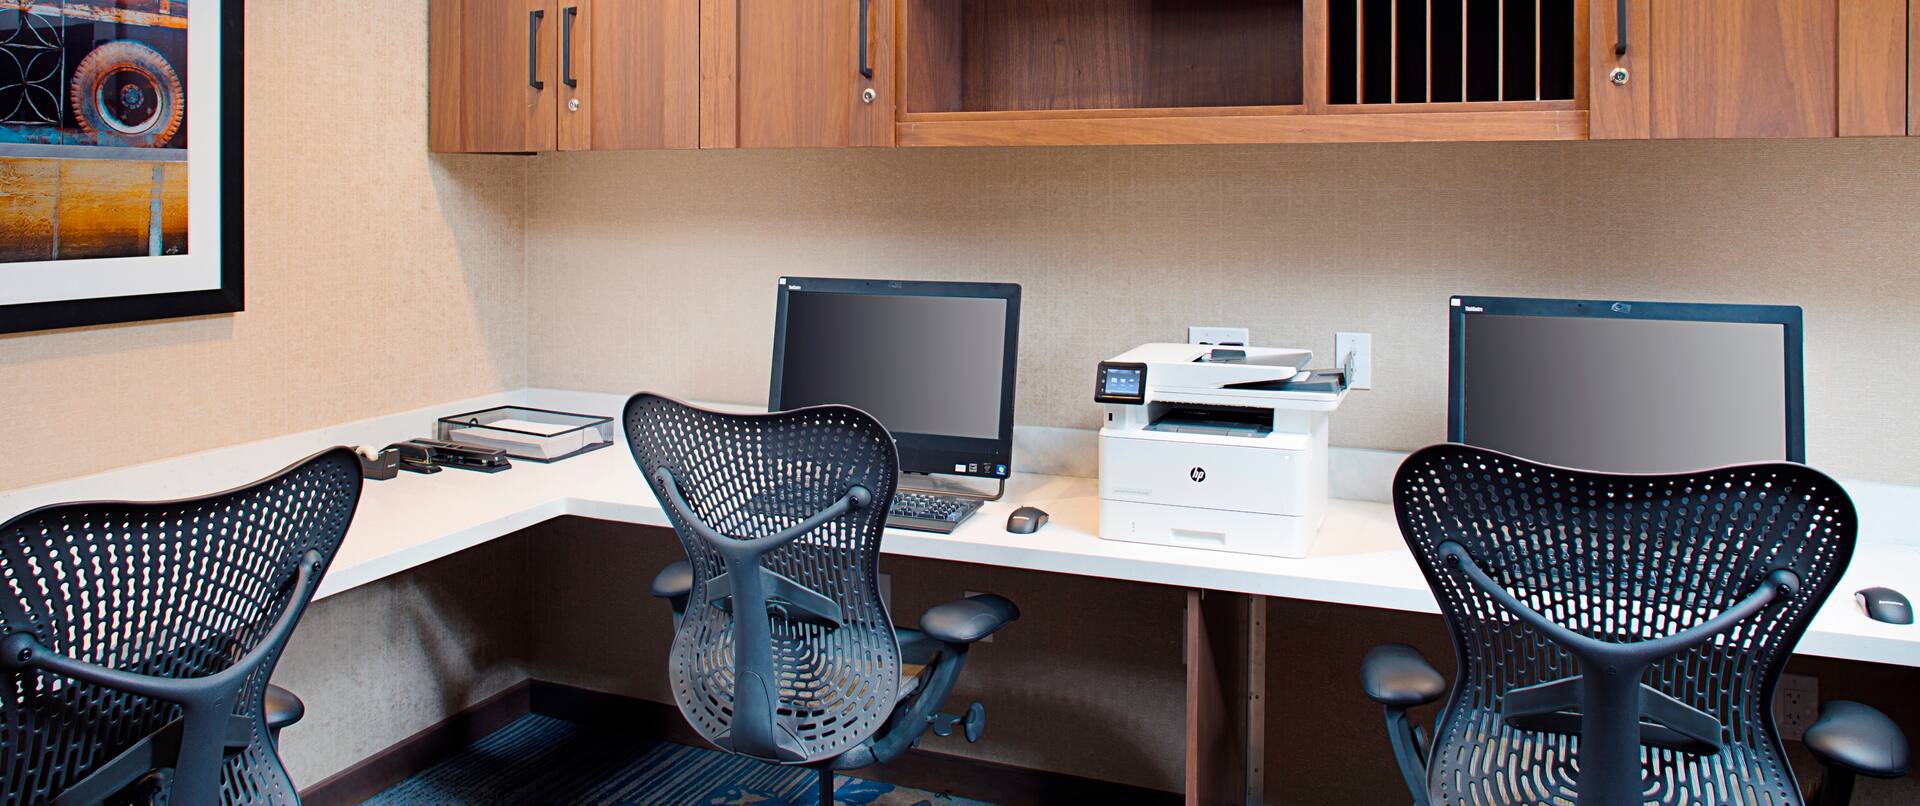 Business Center With Wall Art and Storage Cabinets Above Three Computer Workstations, Ergonomic Chairs, Wall Art, and Printer/Fax/Copier